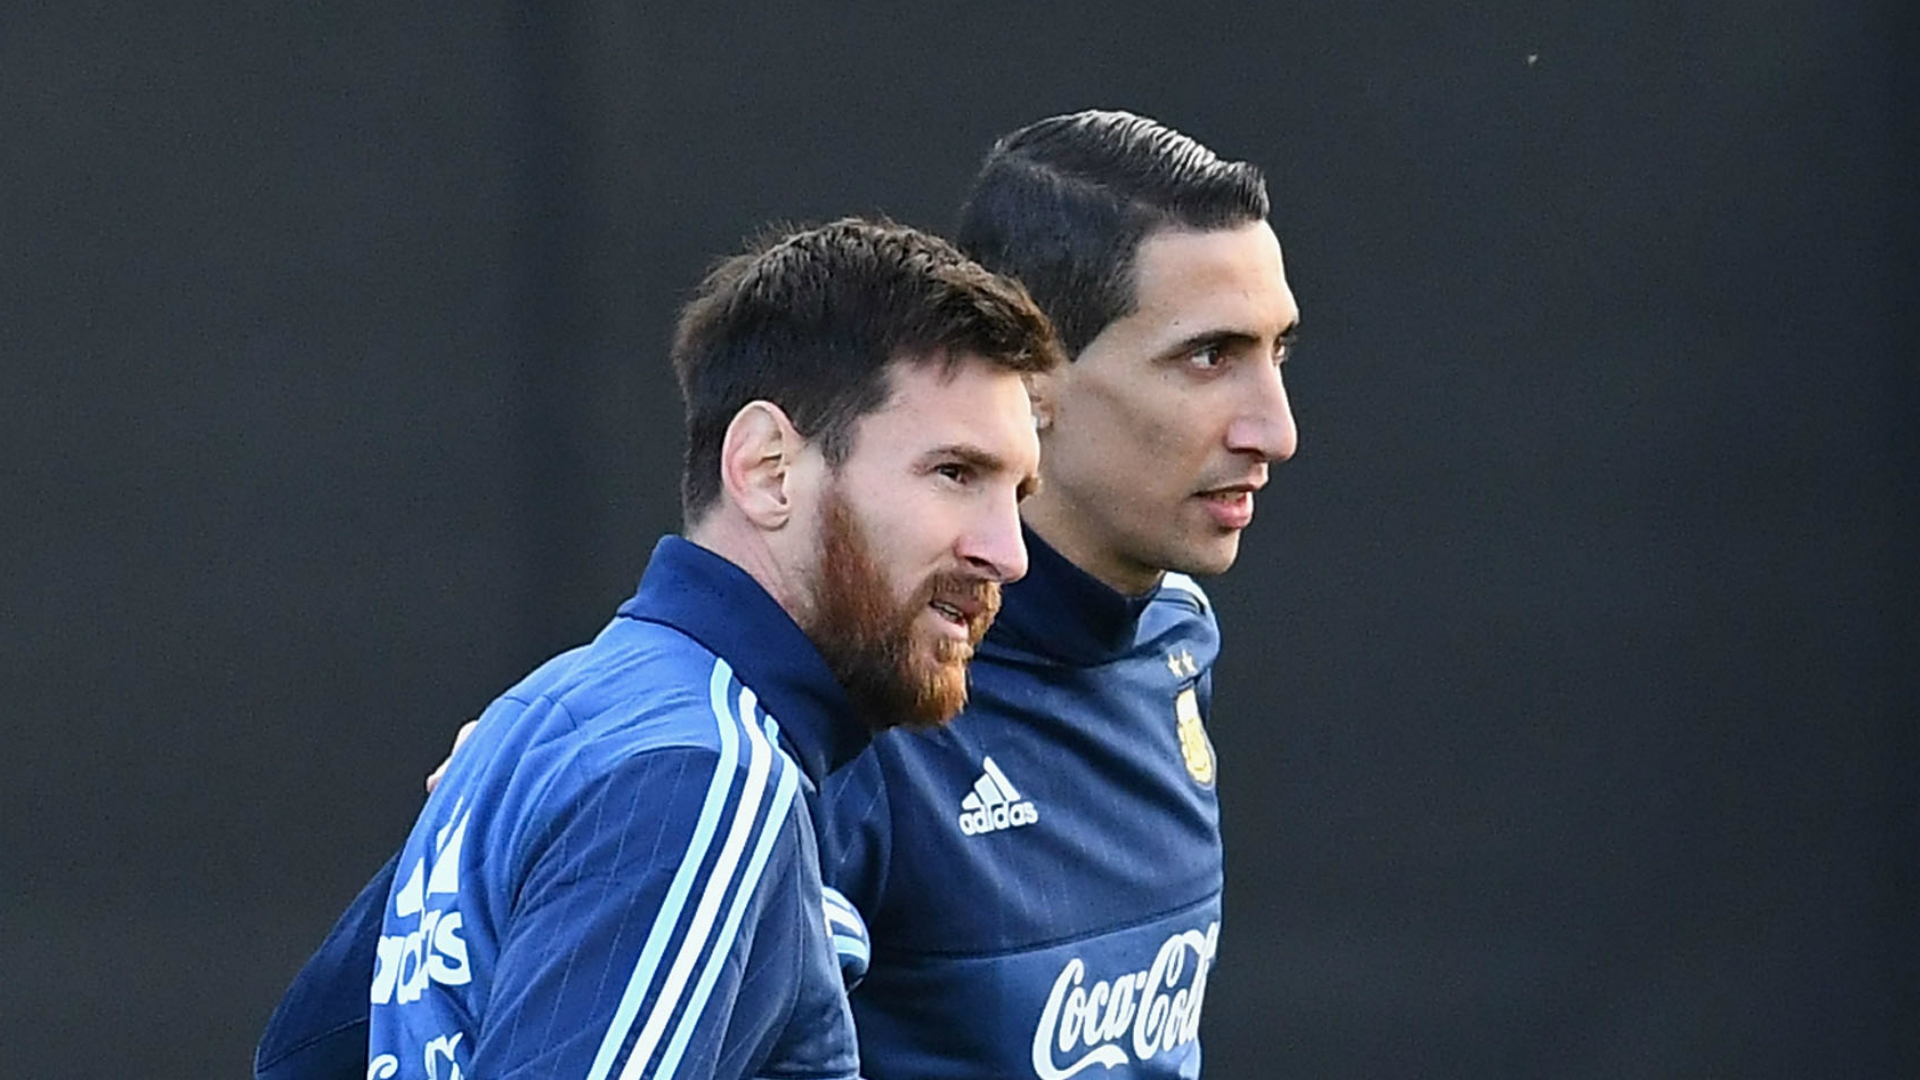 Messi made Argentina squad cry with Copa America speech